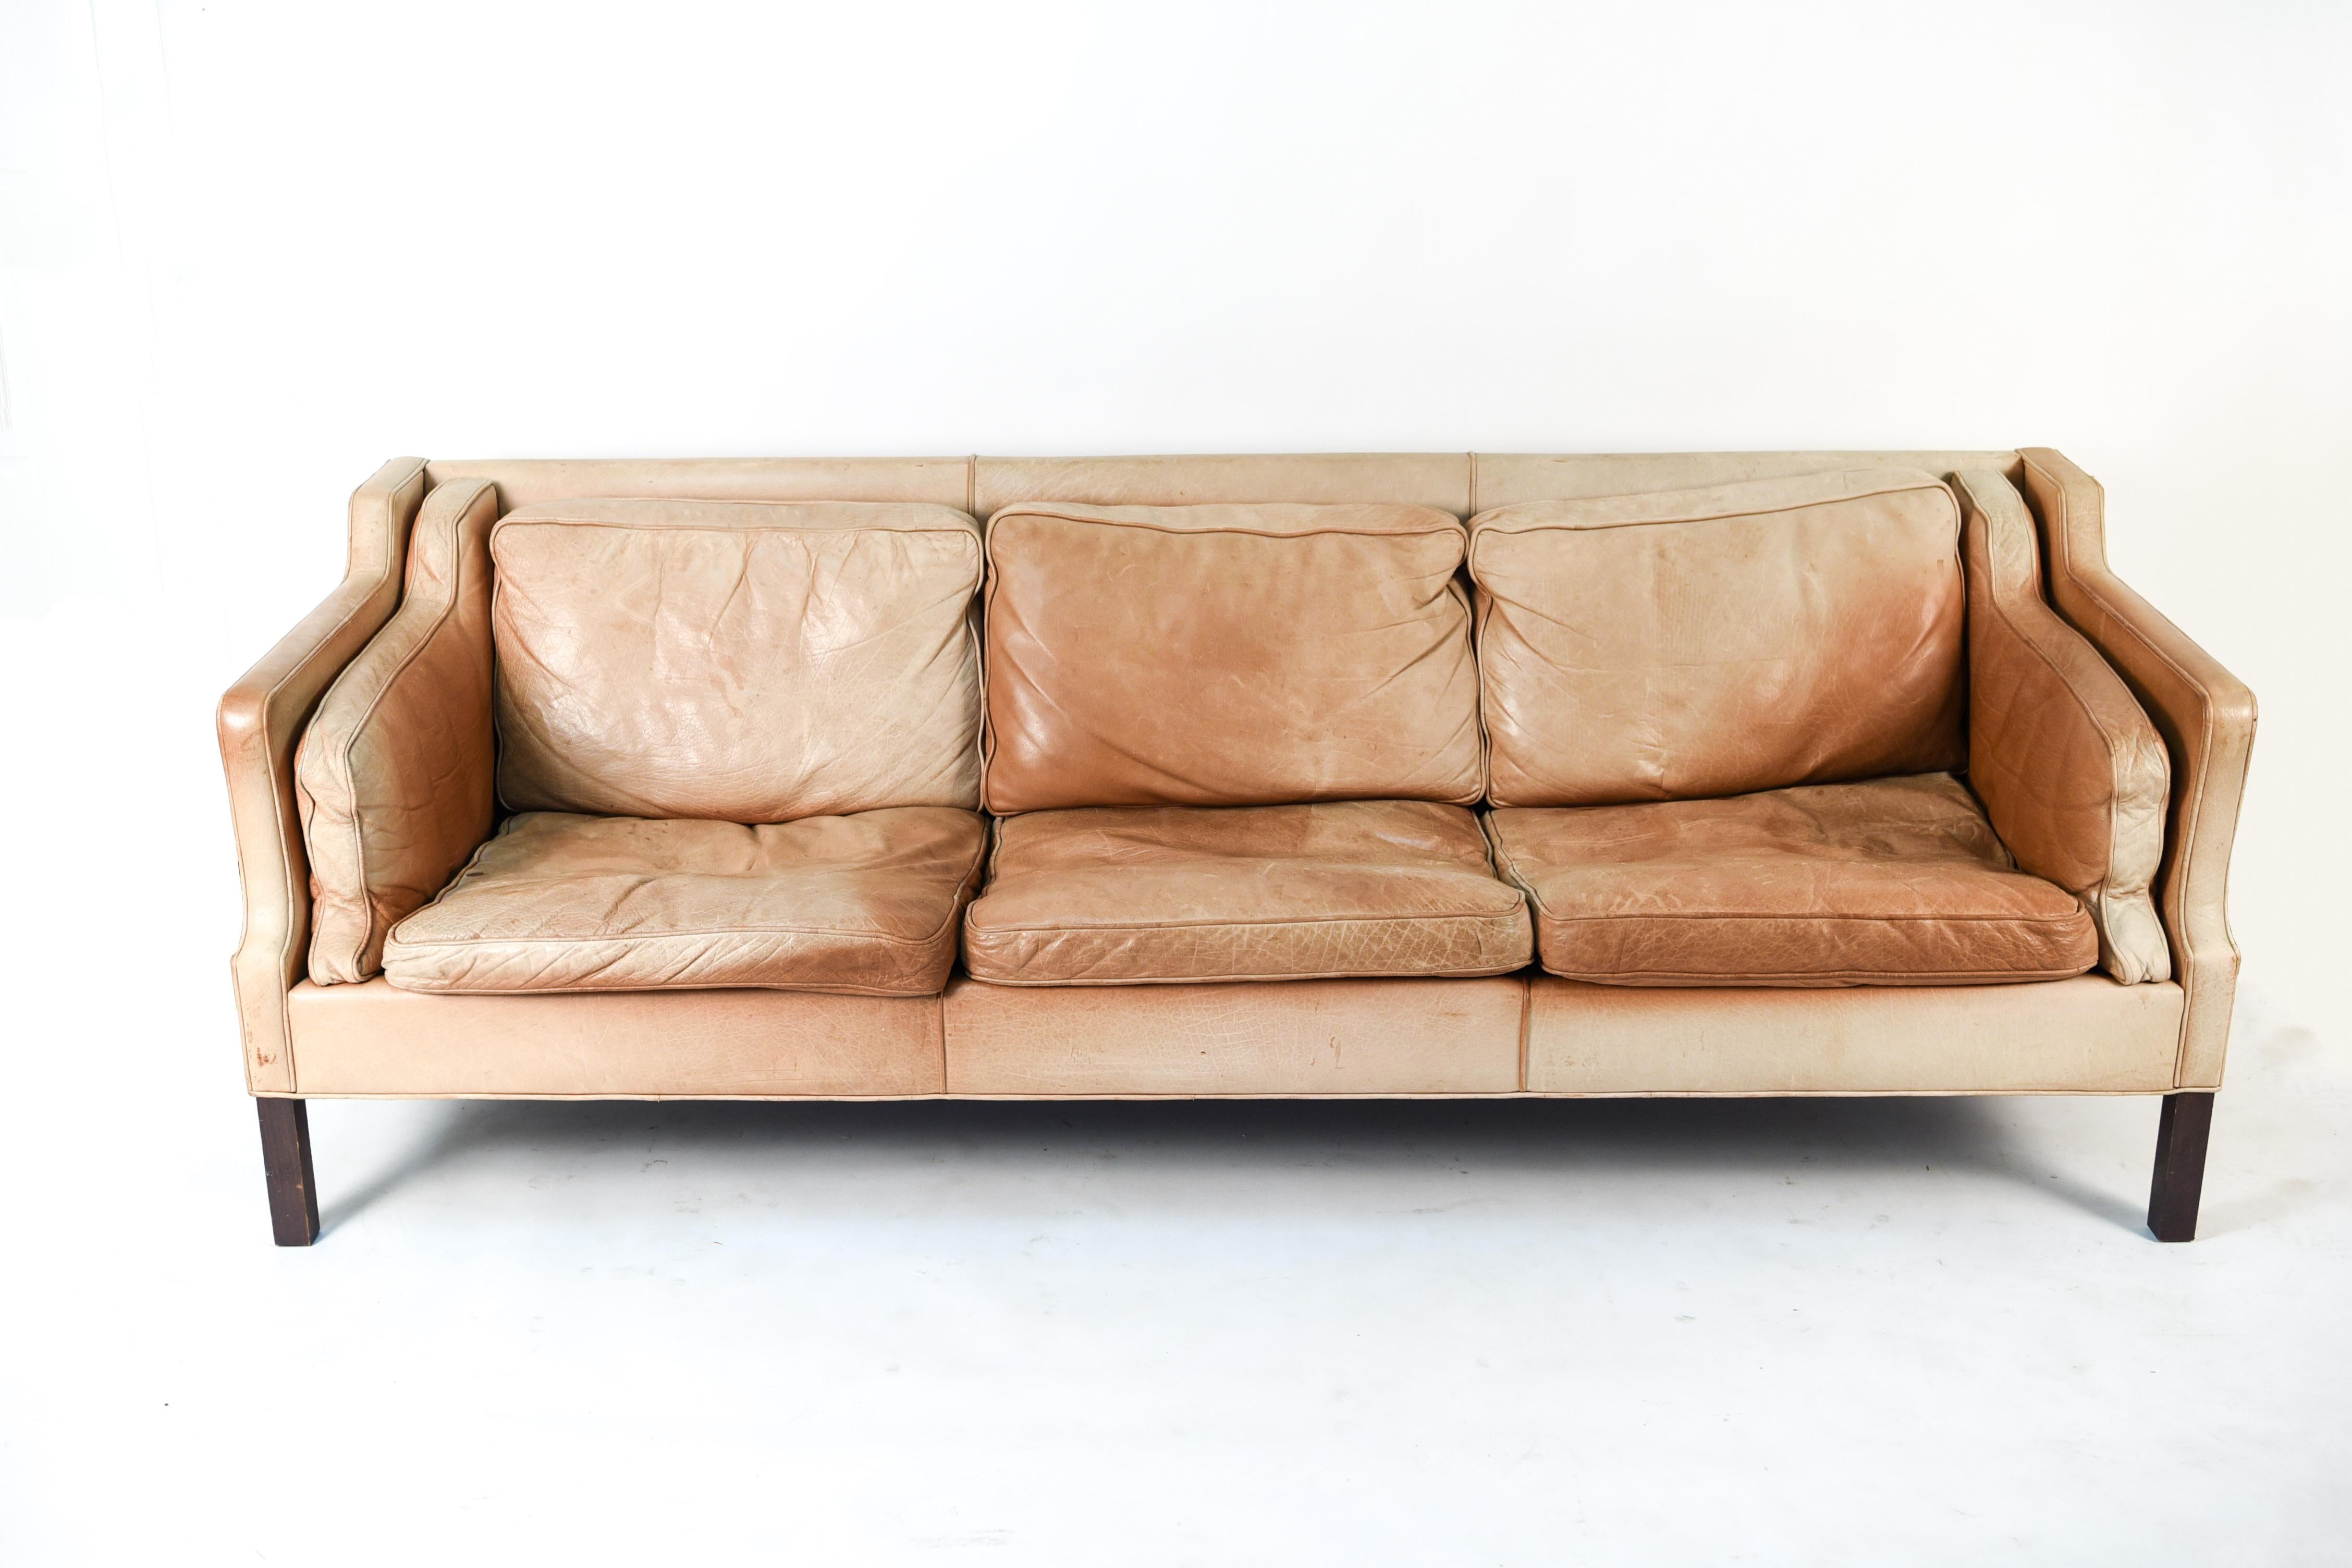 This Danish midcentury three-seat sofa is by designer Rud Thygesen. This sofa is typical of the Classic Scandinavian designs of the 1960s and retains its timeless desirability. Upholstered in vintage leather, this sofa has a wonderful patina